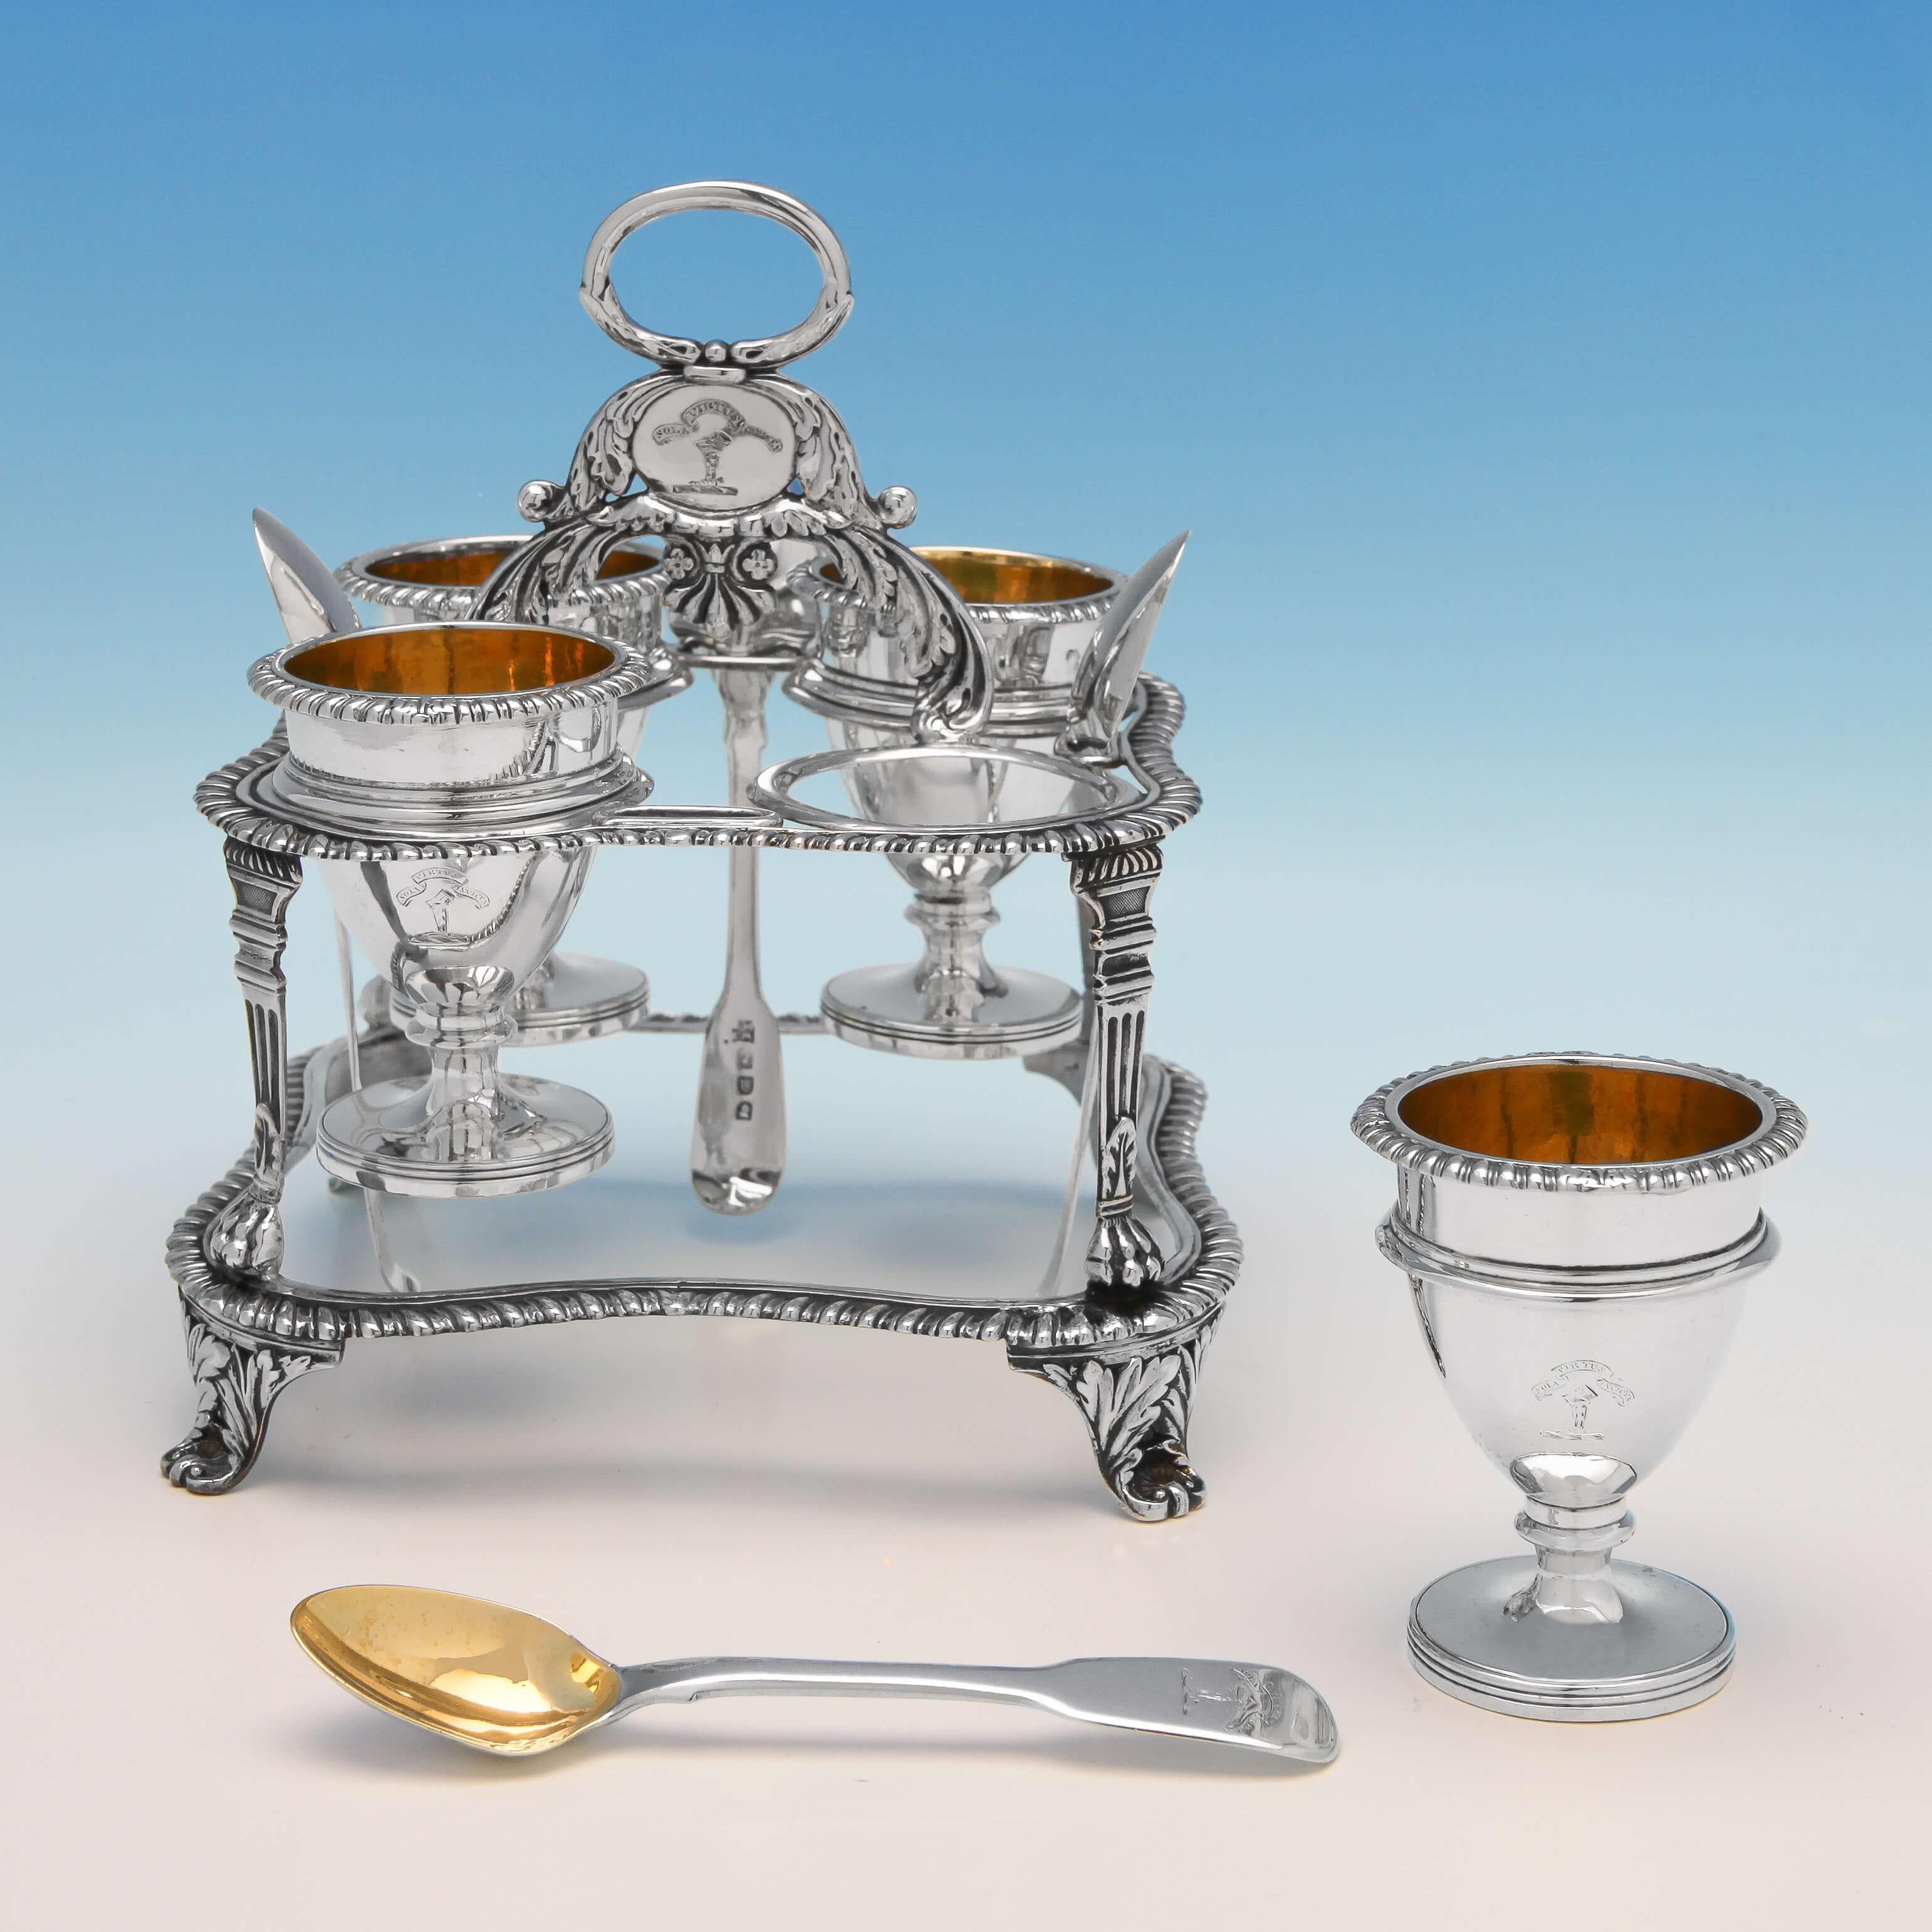 Hallmarked in London, 1816 by Emes & Barnard, with spoons hallmarked in London, 1817 by Ely & Fern, this handsome Antique, Regency, sterling silver egg cruet comprises of four gilt interior egg cups and spoons, housed in a shaped, gadroon border